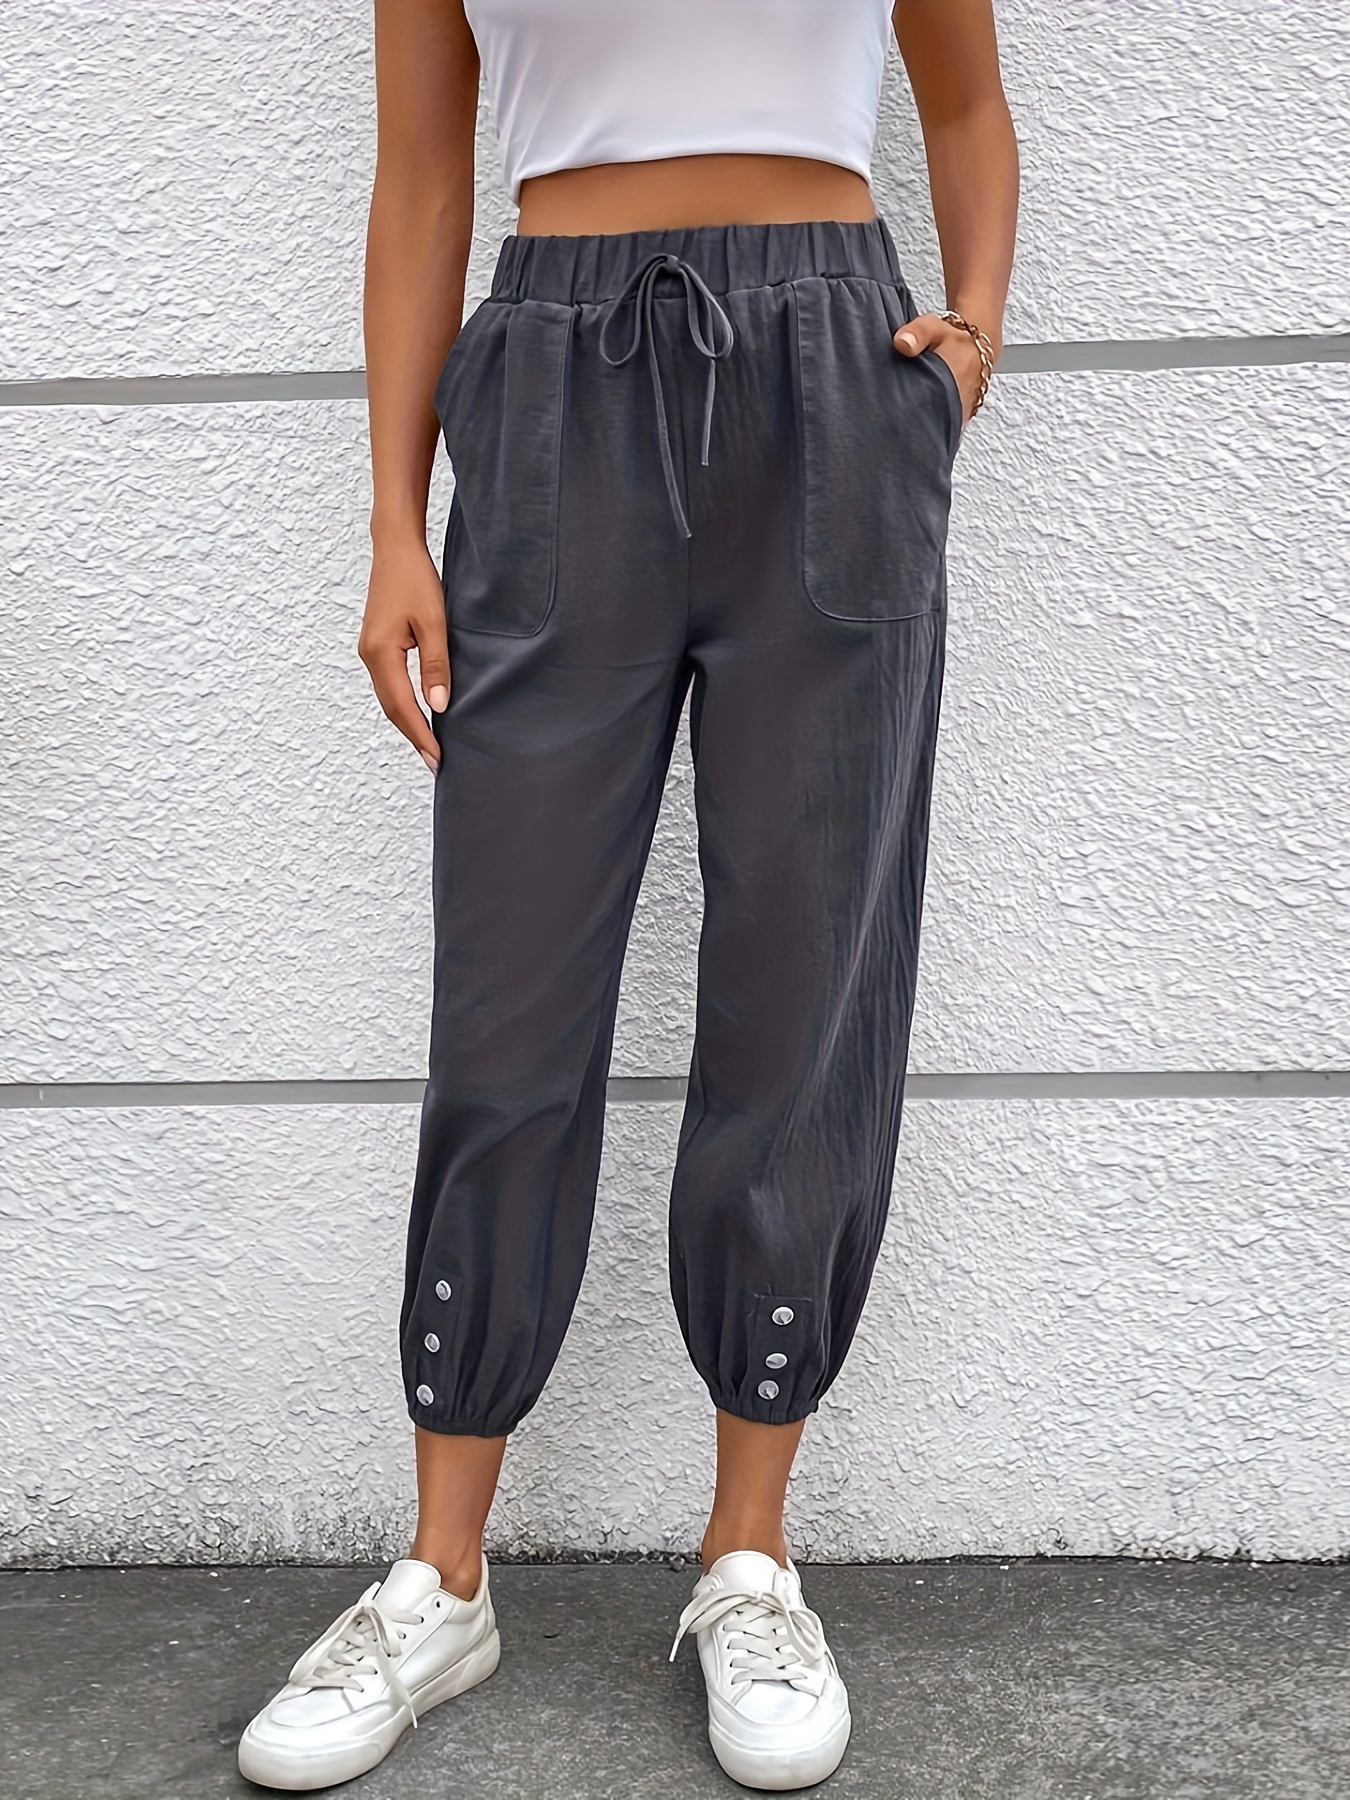 solid button cropped jogger pants casual tied elastic waist cotton pants with pocket womens clothing